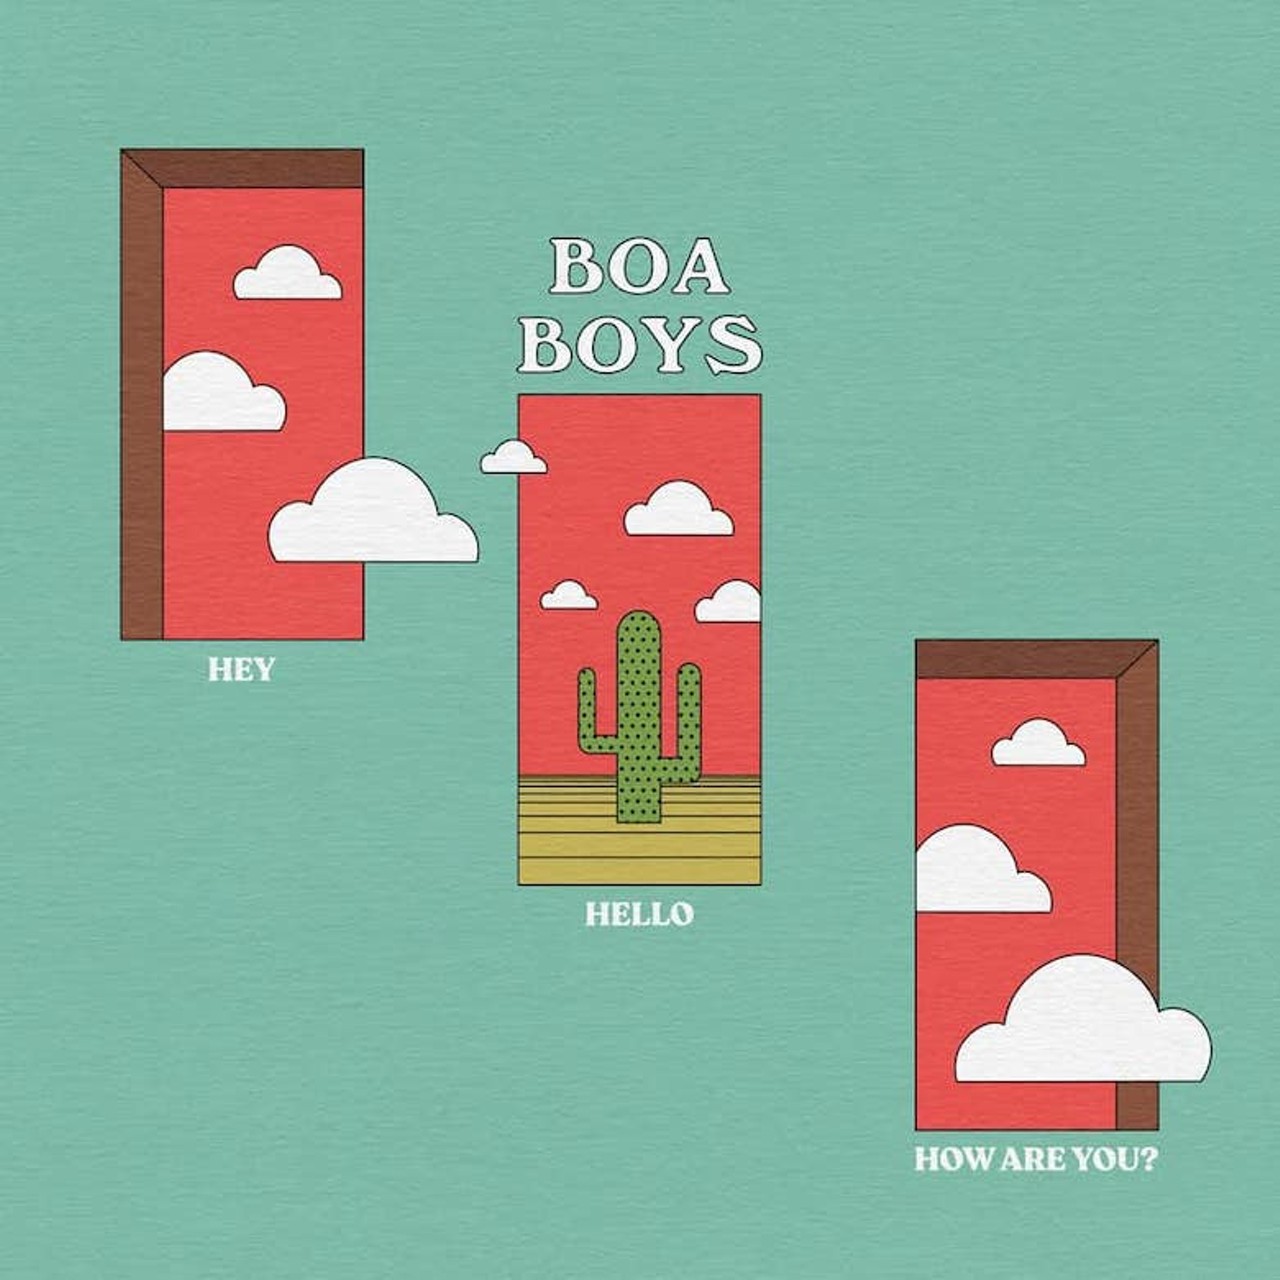 Boa Boys
Hey, Hello, How Are You?
This breezy track from last spring, the most recent release from psych-groovers Boa Boys, brings forth all the notes of #quarantinelife, intentionally or not. Shane Spader sings, &#147;I leave my curtains drawn / To let you know that I&#146;m okay / You can stop by any other day / It&#146;s just me alone in my home / But it didn&#146;t used to be that way.&#148; Even the chorus, &#147;Hey, hello, how are you? / It&#146;s not looking good, but, y&#146;know, power through,&#148; pretty straightforwardly defines much of the last two years. Still, this track isn&#146;t depressing &#151; in fact, the music video, filmed to look like a series of colorful Kodachrome slides, is basically a throwback to the &#145;70s. It&#146;s a neat visual. But don&#146;t let that distract you  &#150;&#150;  the point of the song is about appreciating good times with loved ones. As Spader puts it: &#147;If there&#146;s anything I&#146;ve learned, it&#146;s plant a tree and love your family.&#148; &#151;Carolyn Brown 
Listen on Spotify